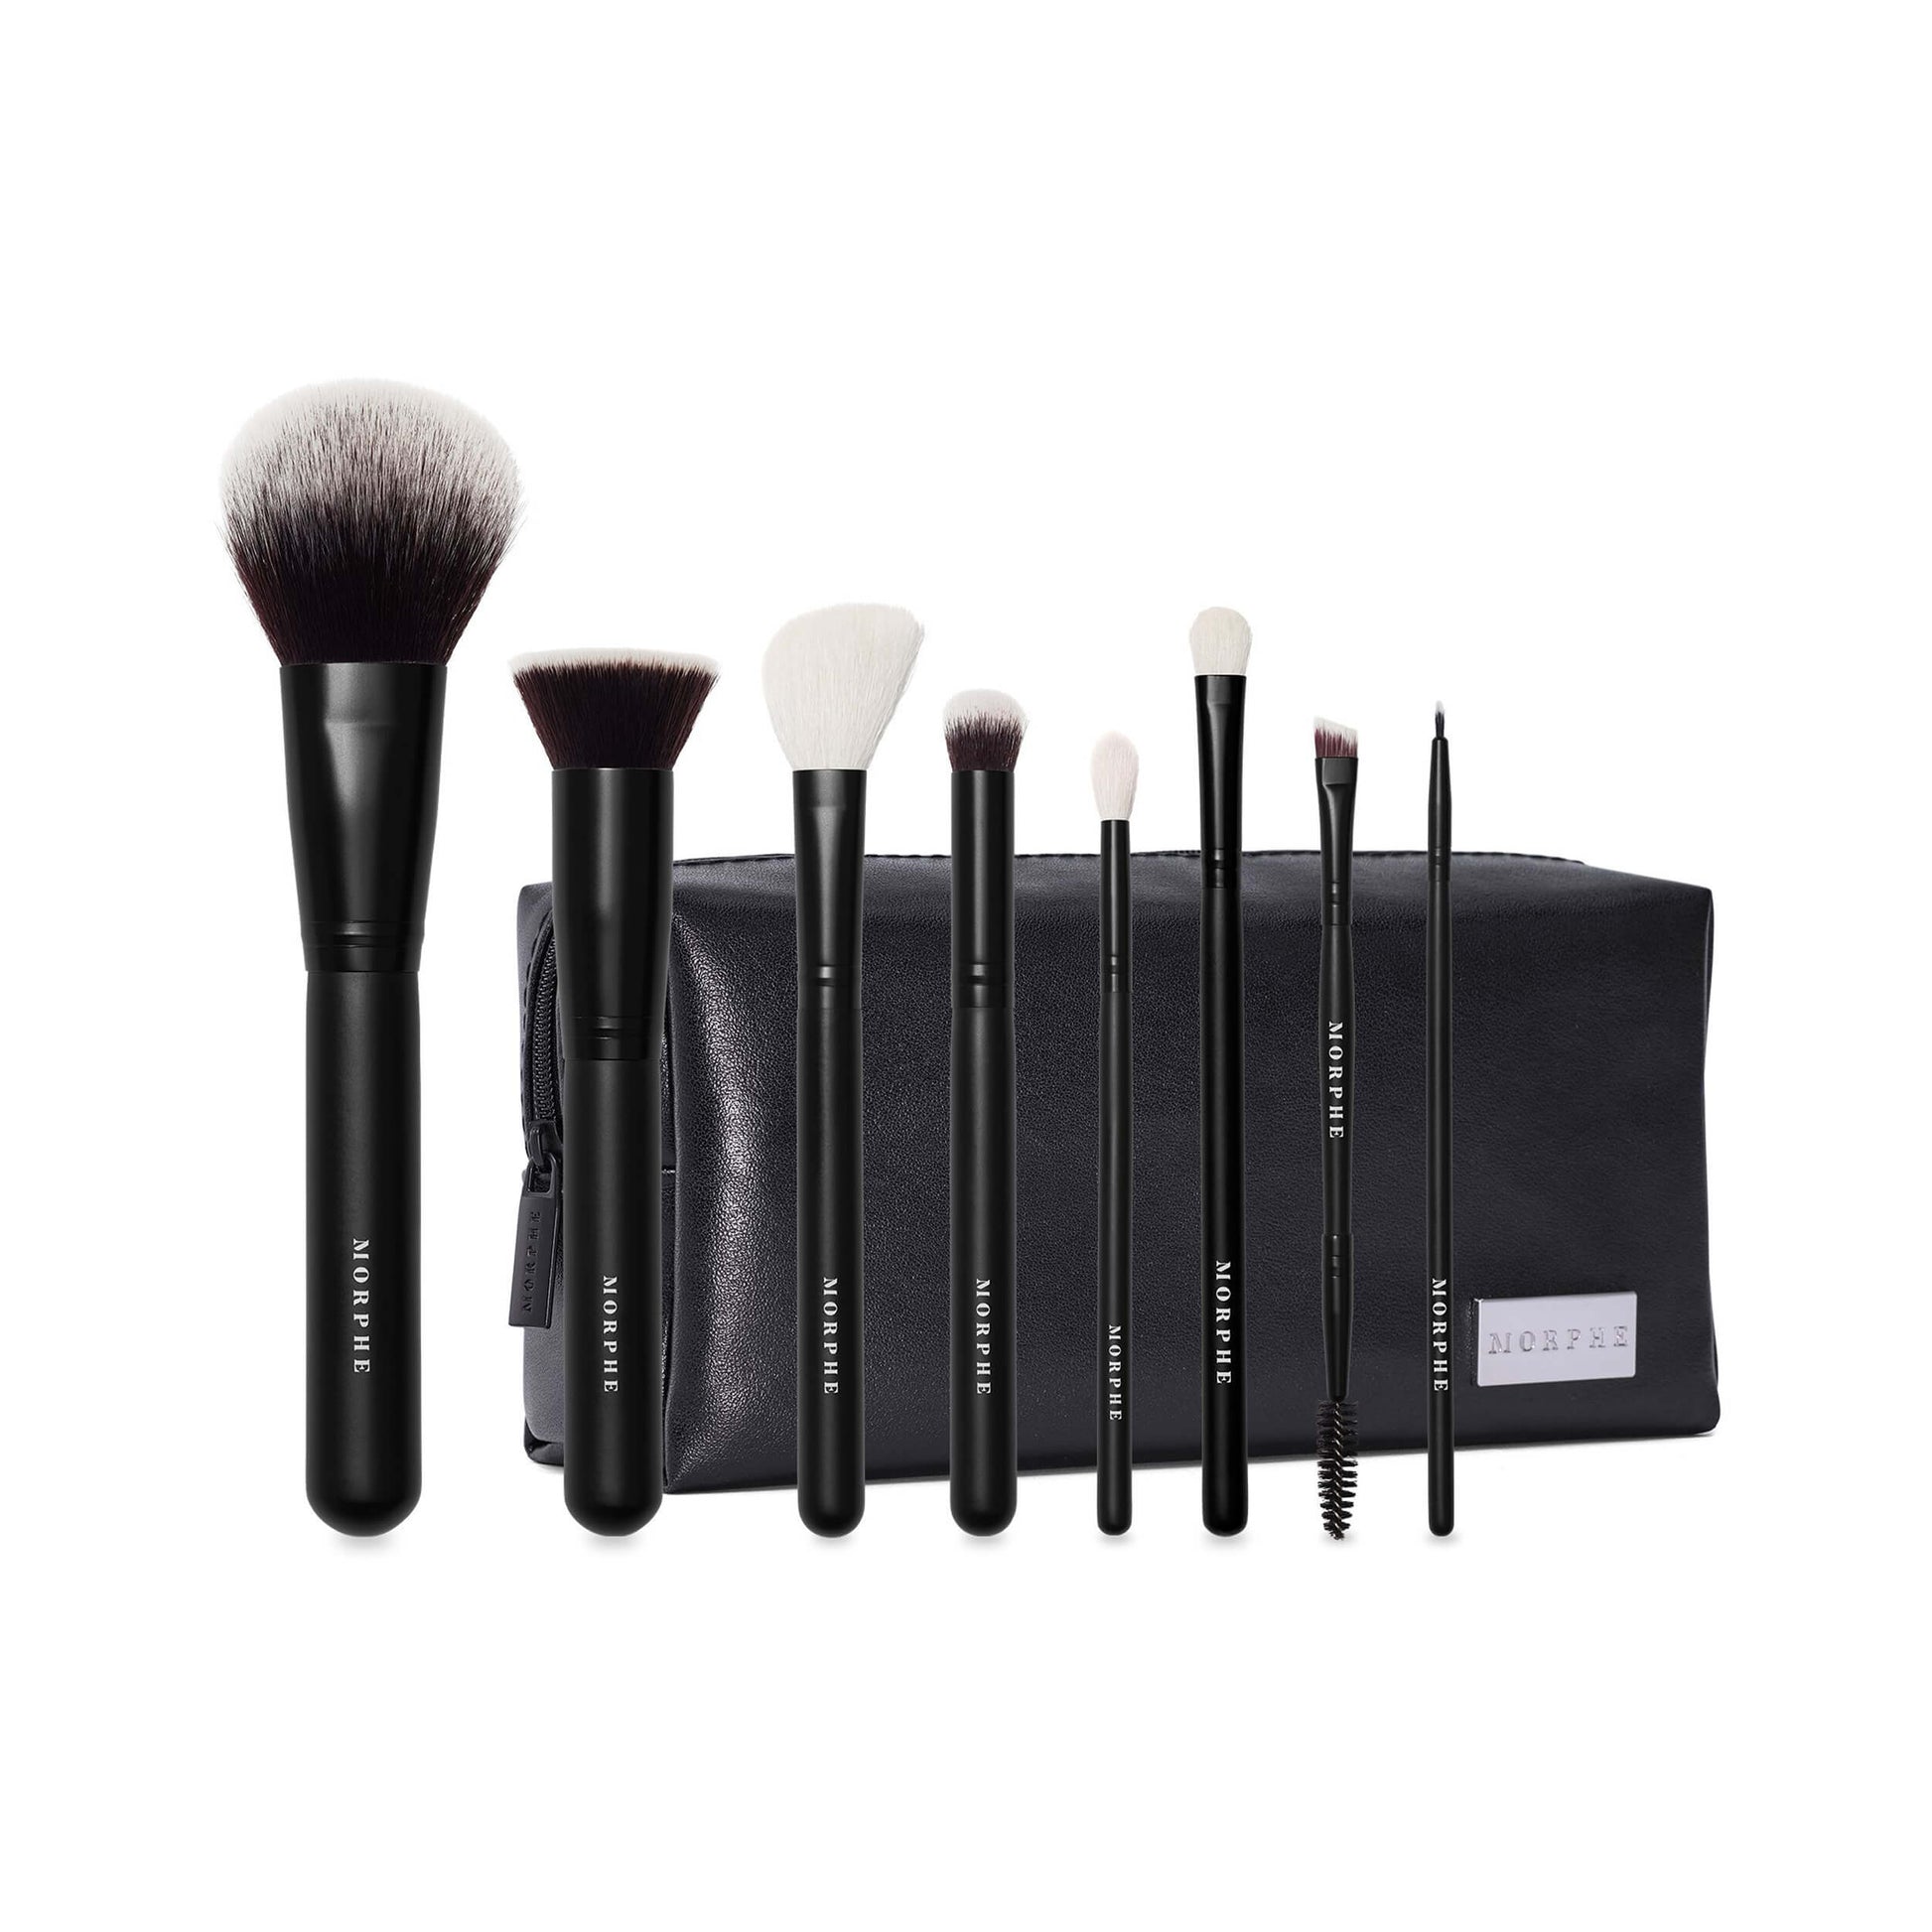 Morphe Cosmetics Get Things Started Brush Collection